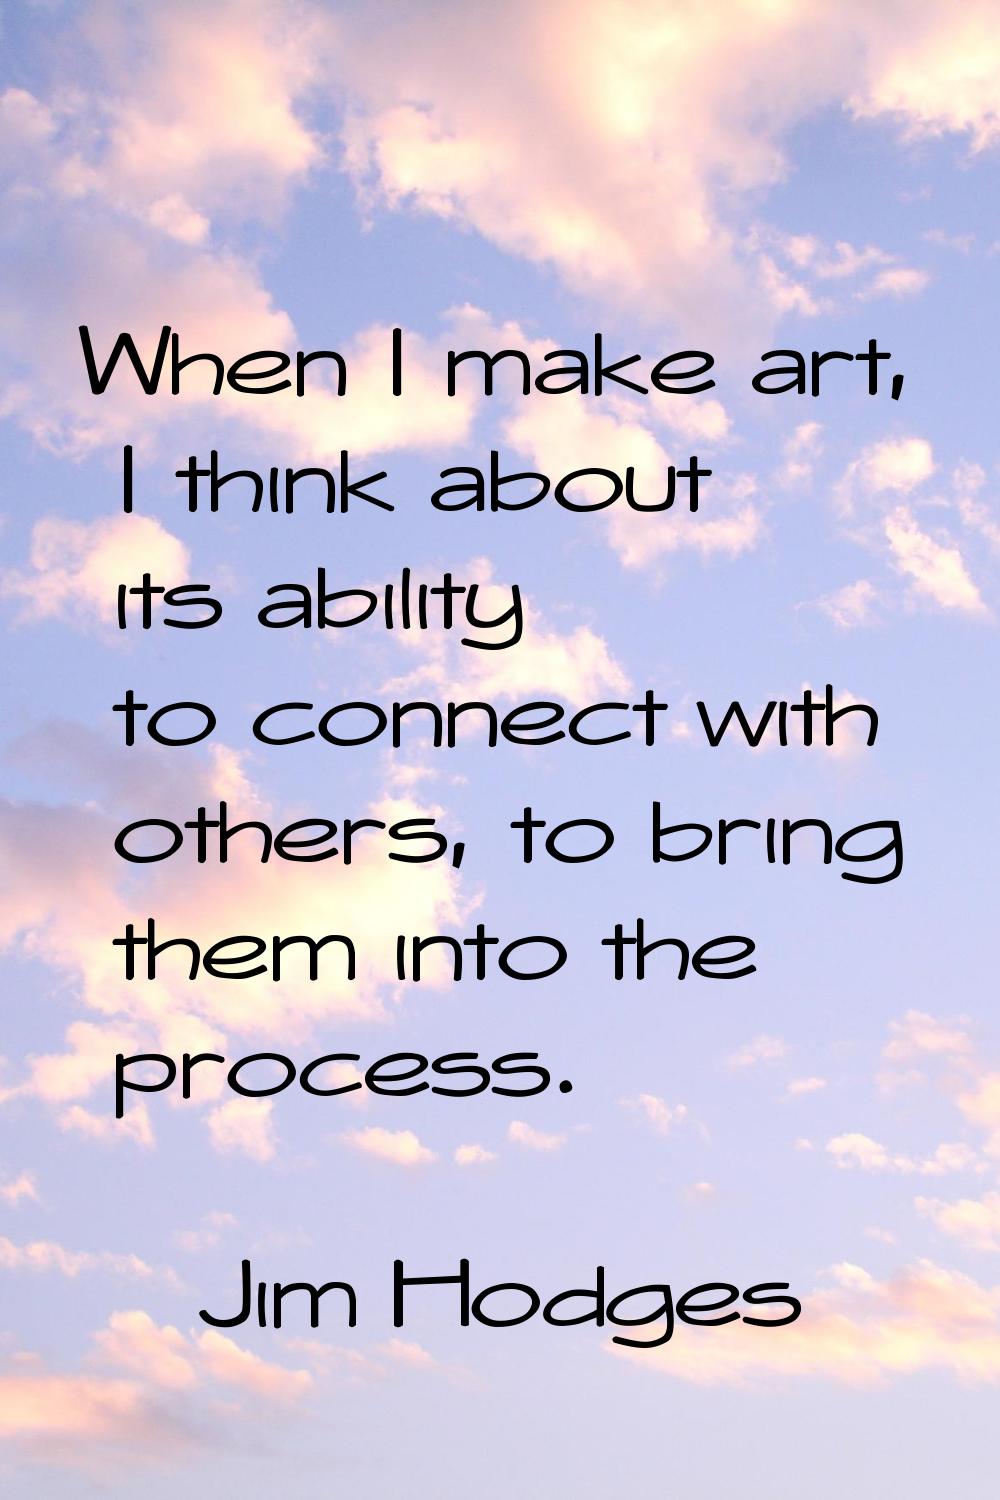 When I make art, I think about its ability to connect with others, to bring them into the process.